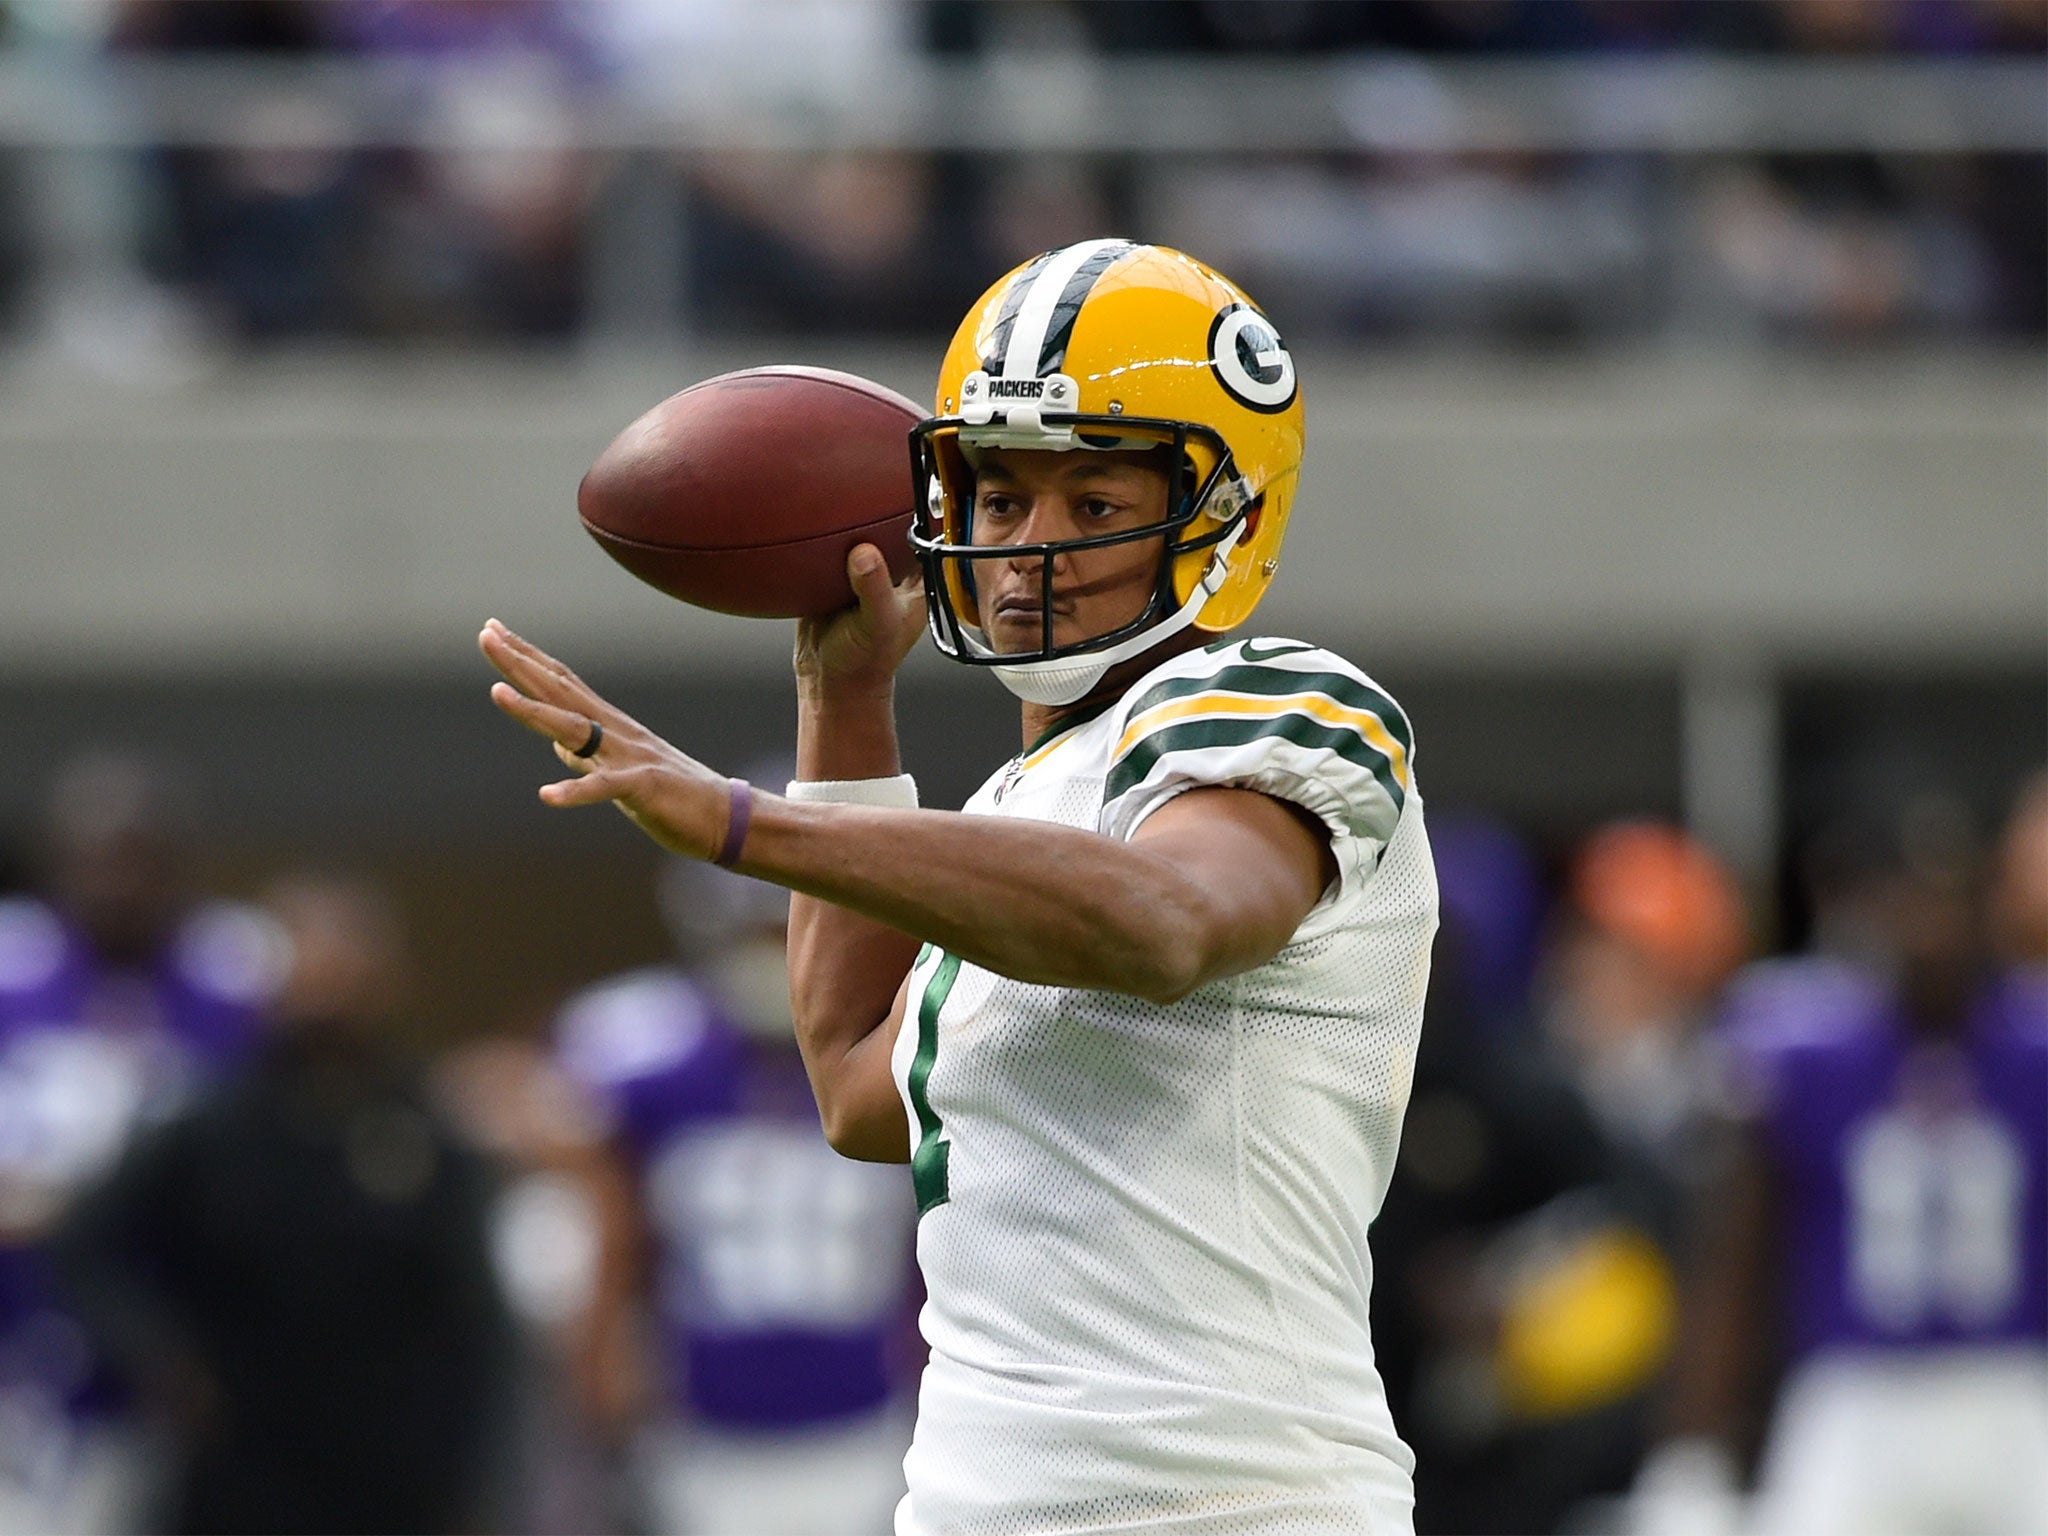 Brett Hundley has a big chance in Rodgers' absence